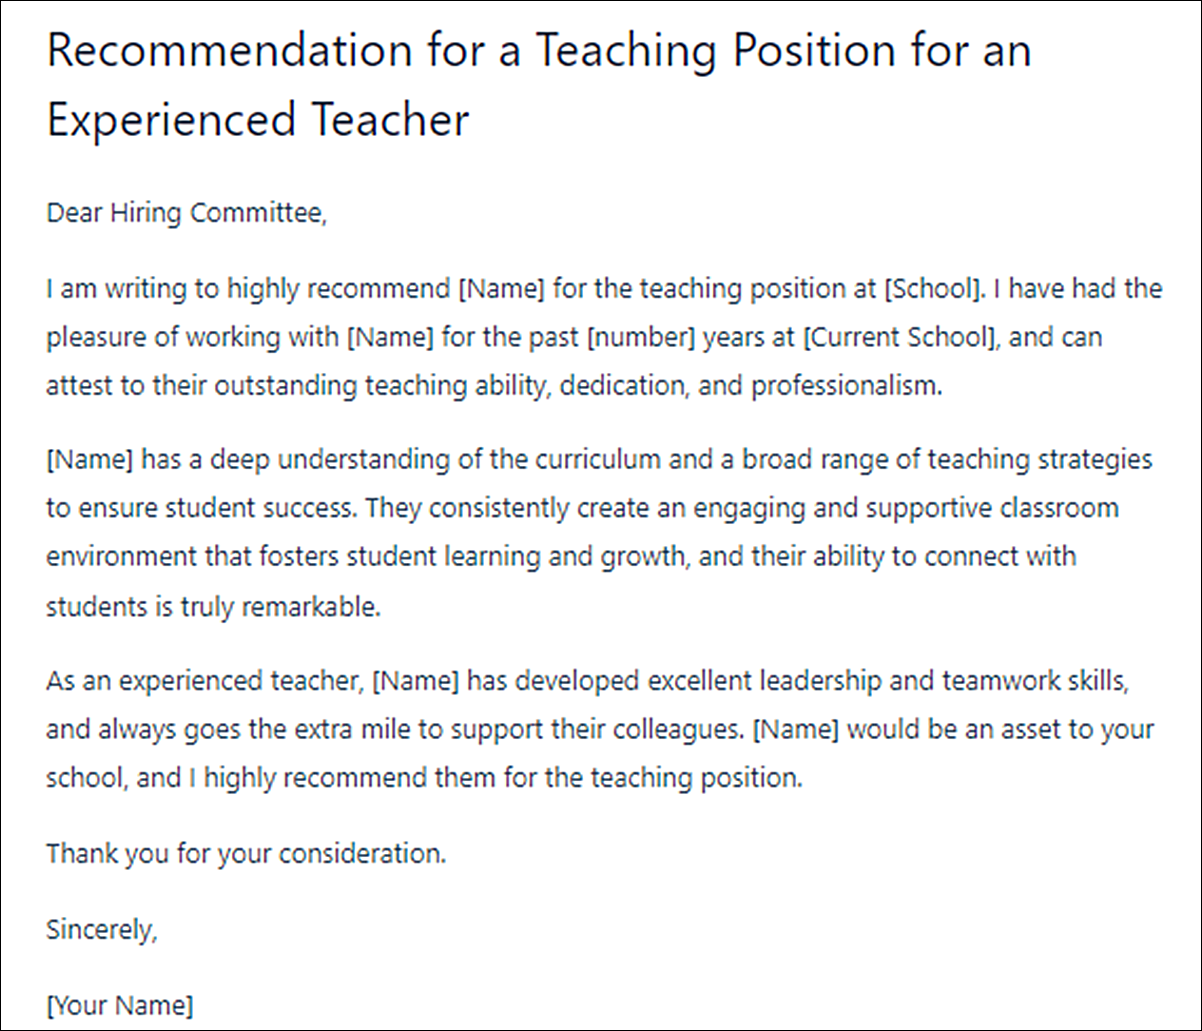 Letter of Recommendation Templates for a Teaching Position